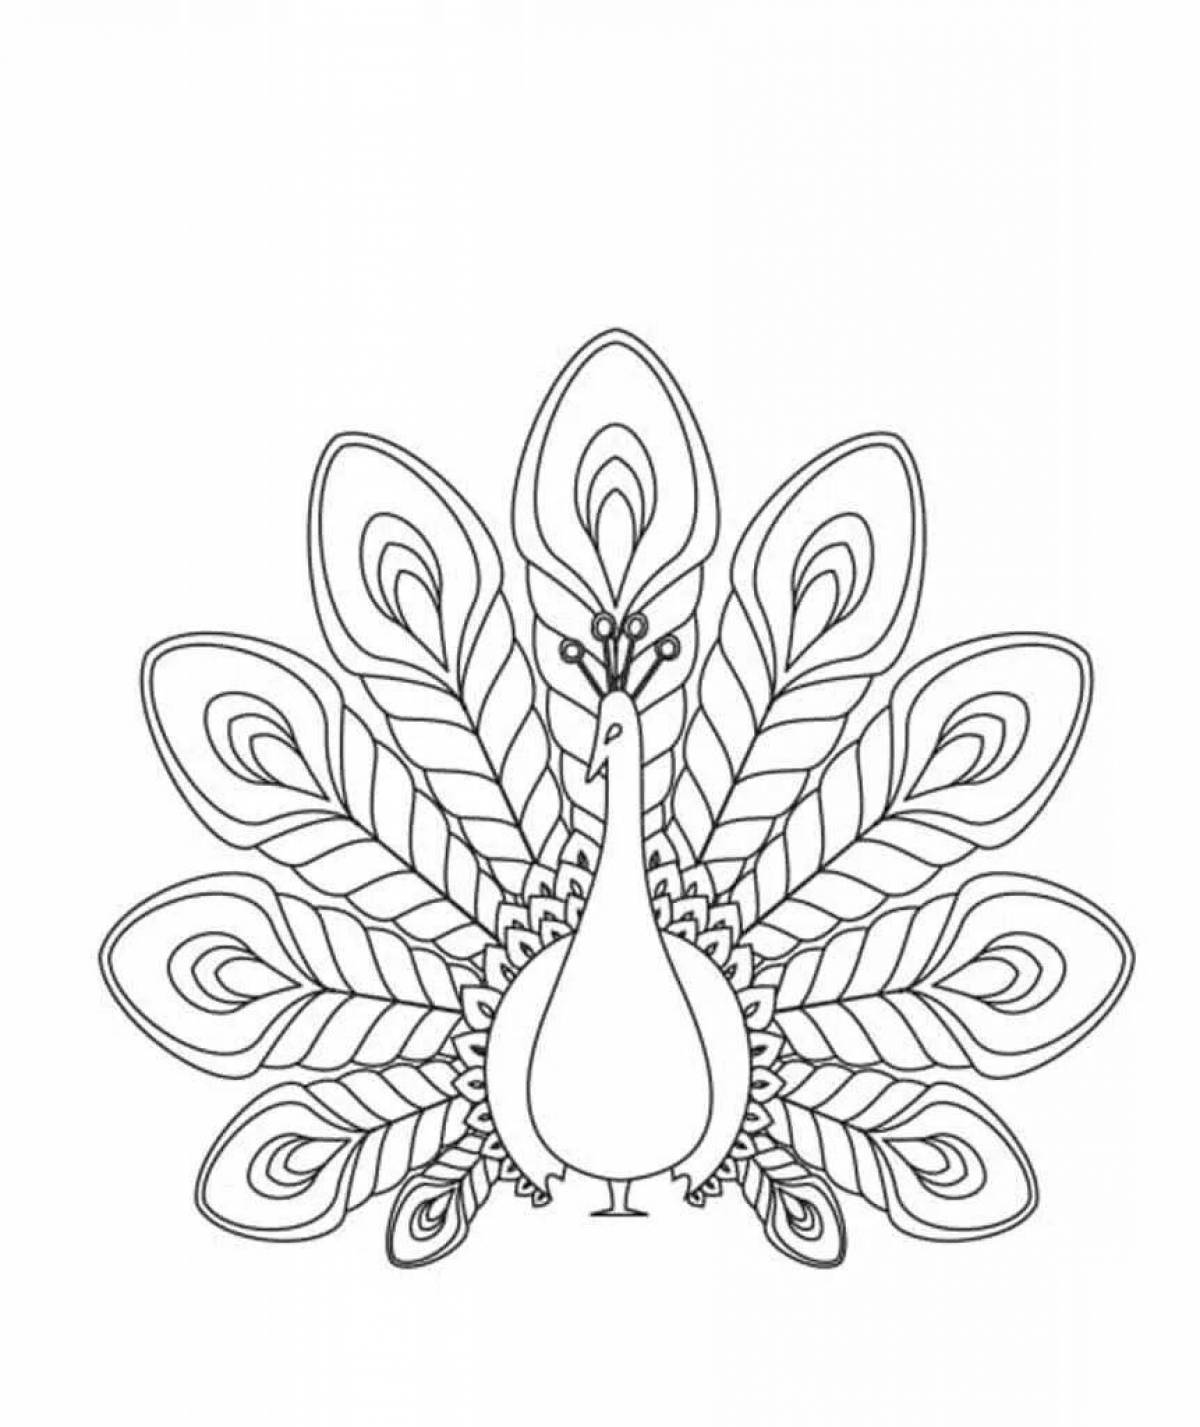 Exquisite firebird feather coloring book for kids